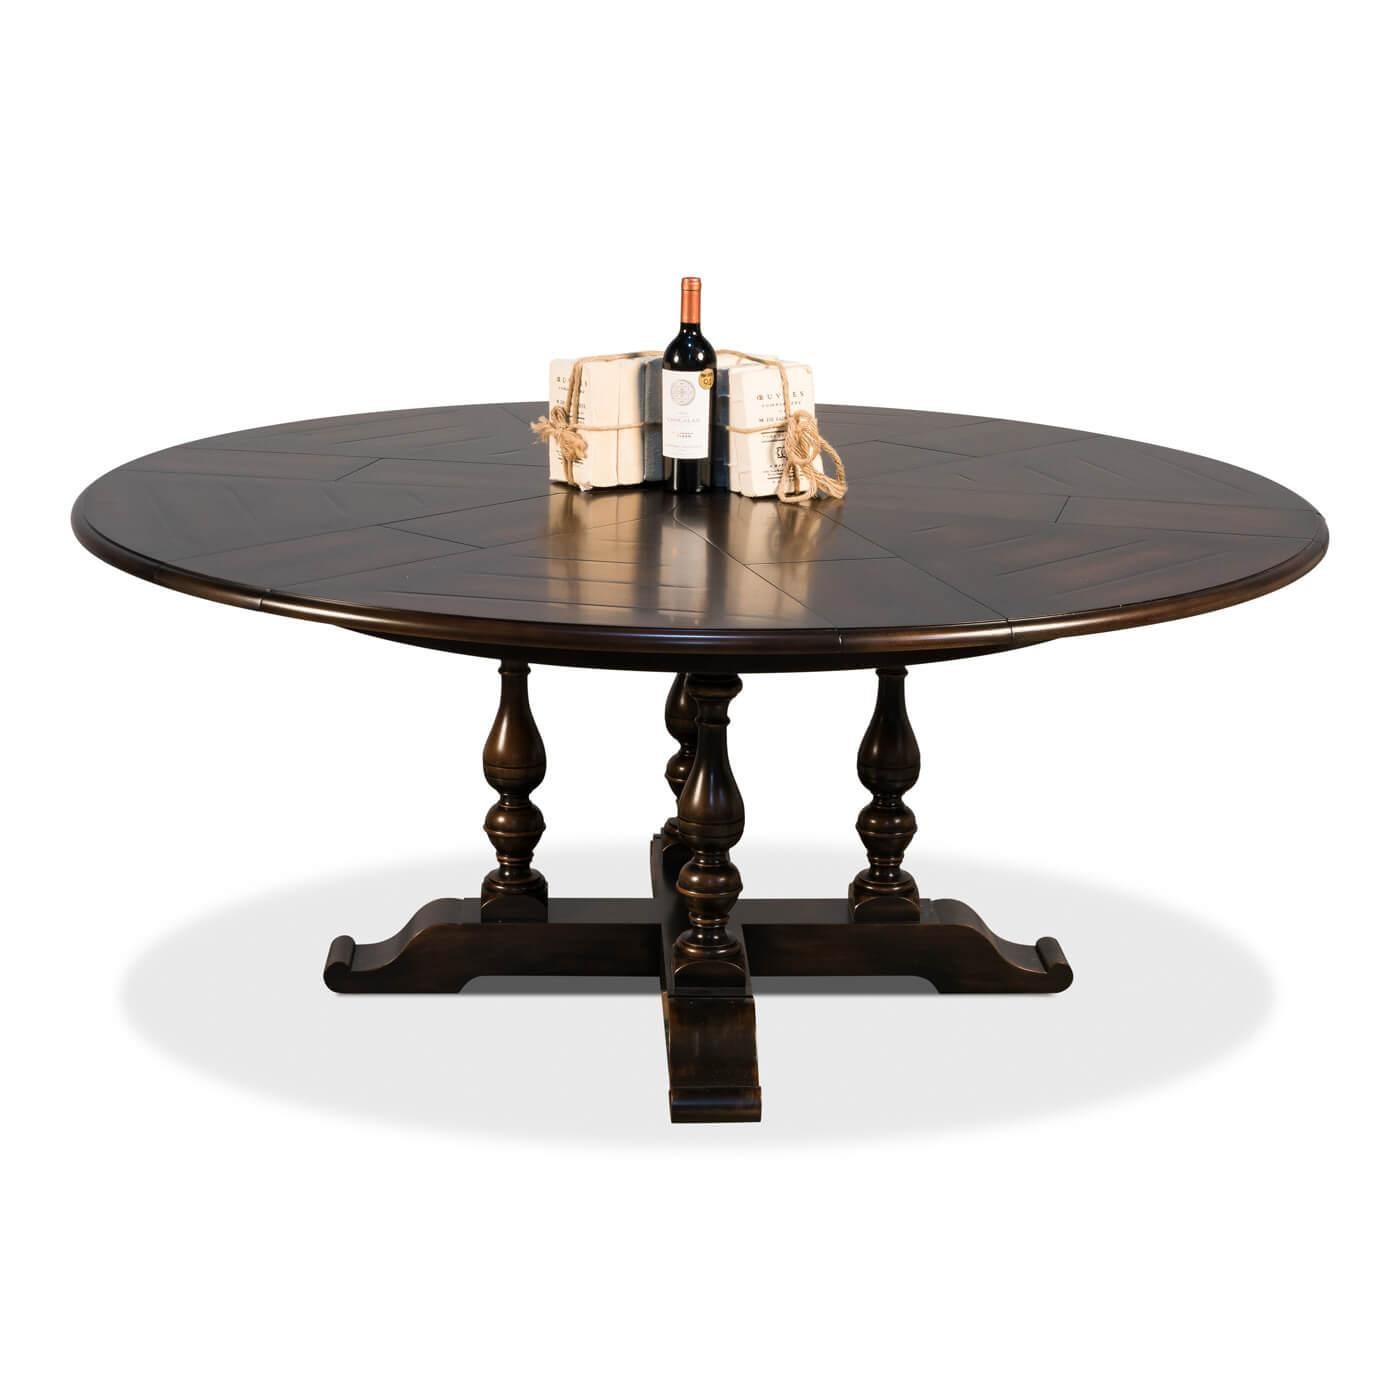 Wood English Style Round Extension Dining Table, Ebony Finish For Sale